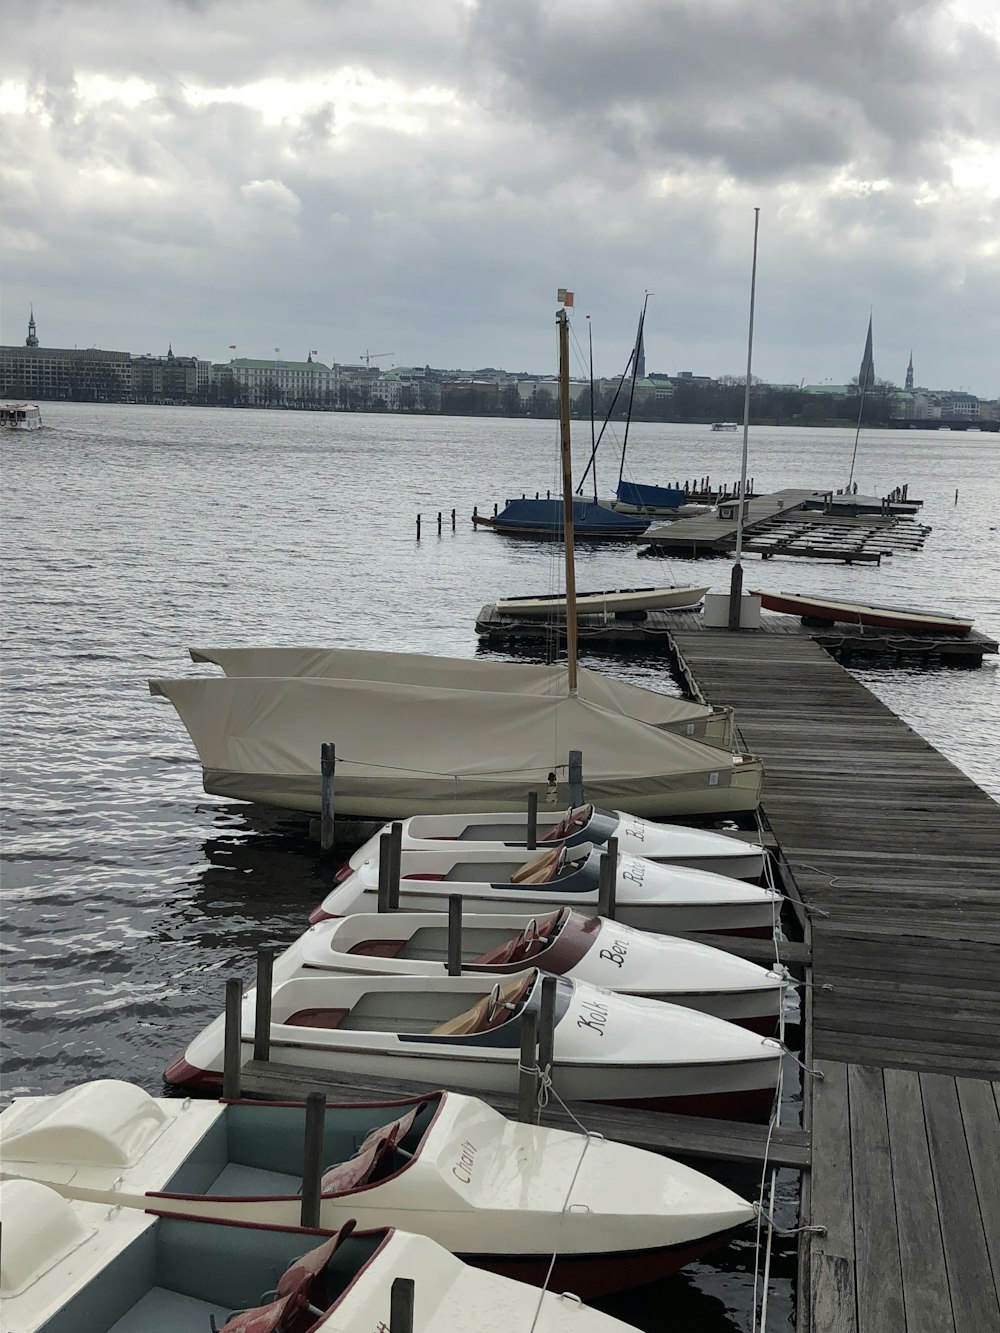 boats on wooden dock under gray sky during daytime